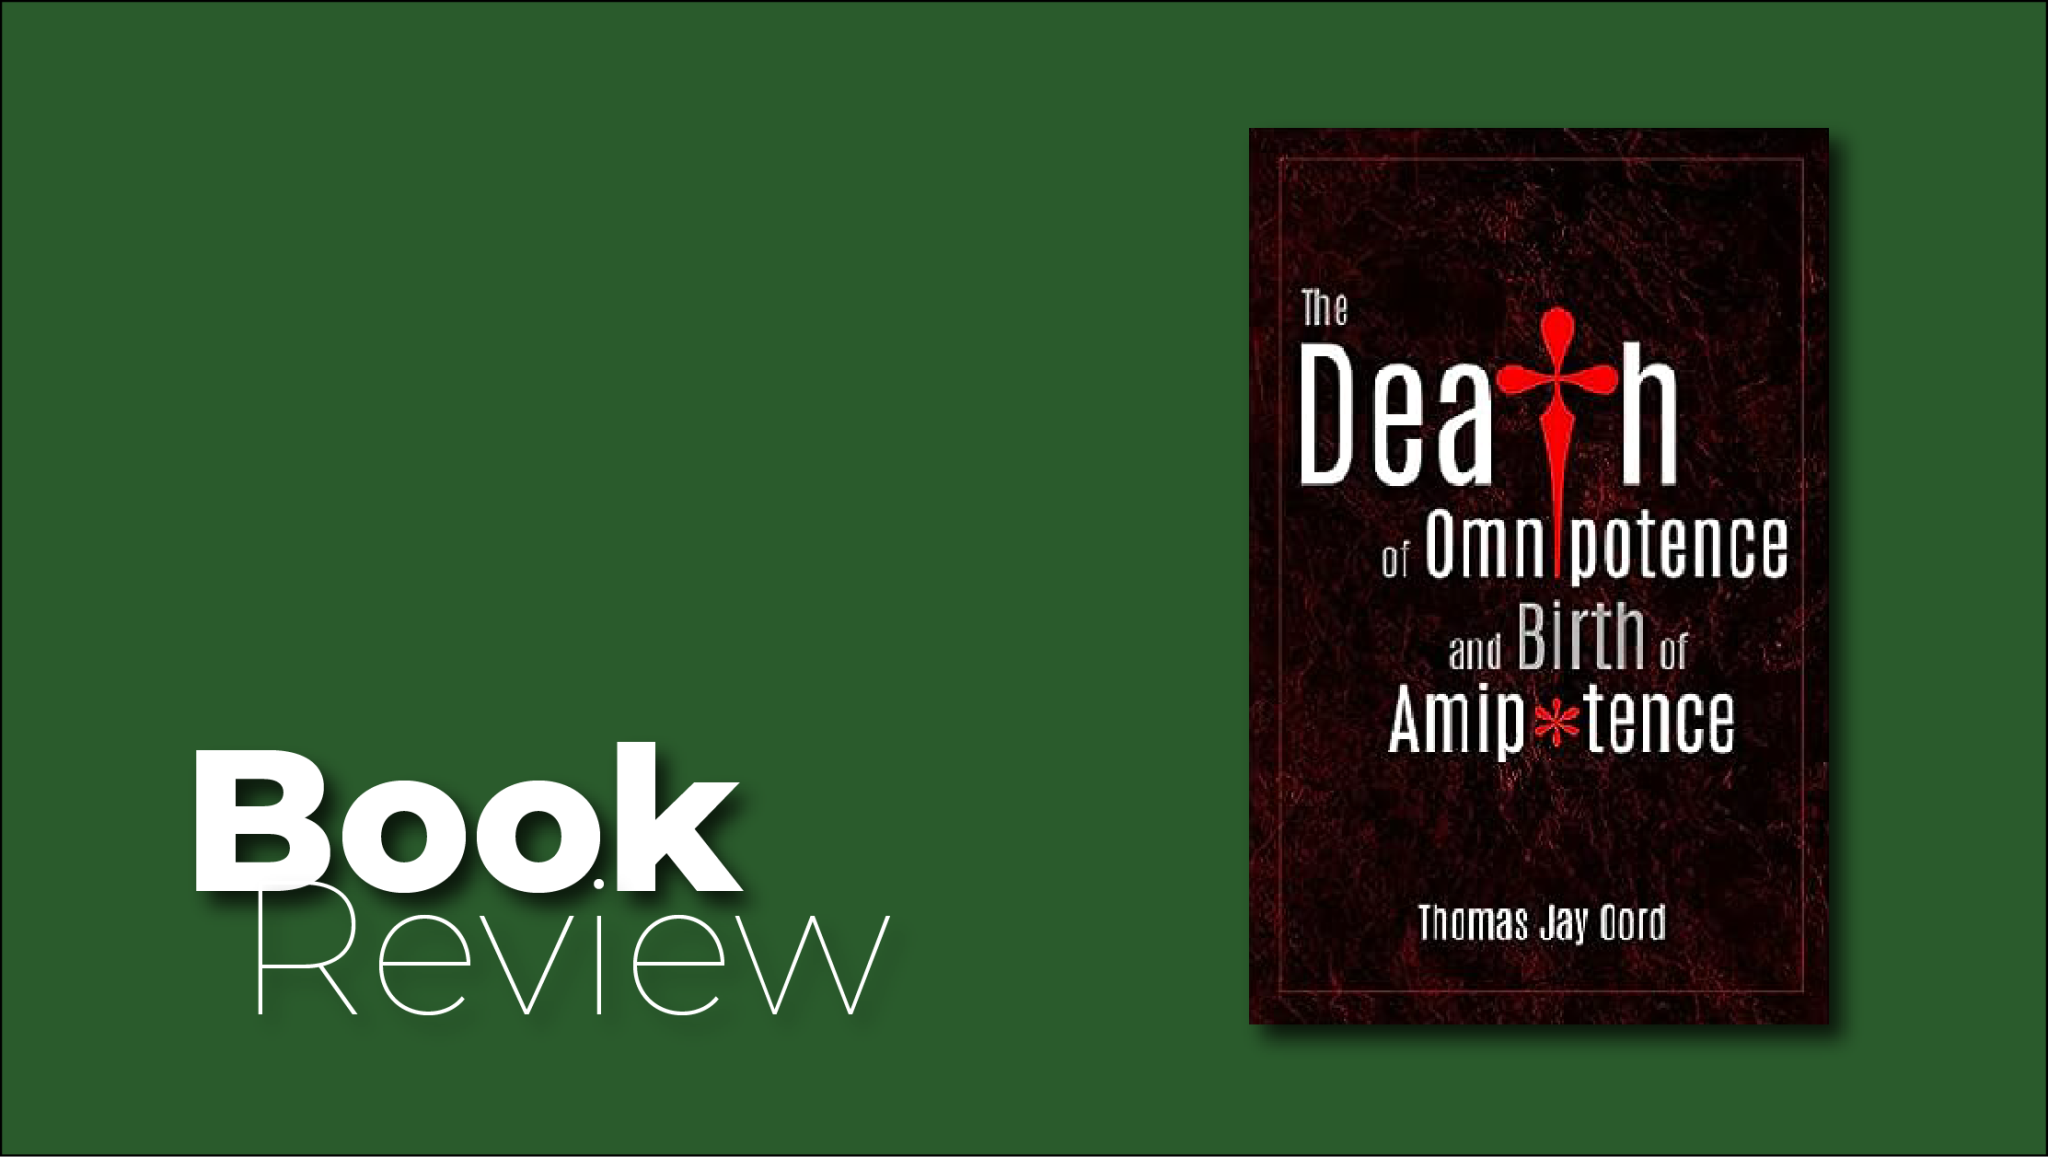 Book Review: The Death of Omnipotence and Birth of Amipotence